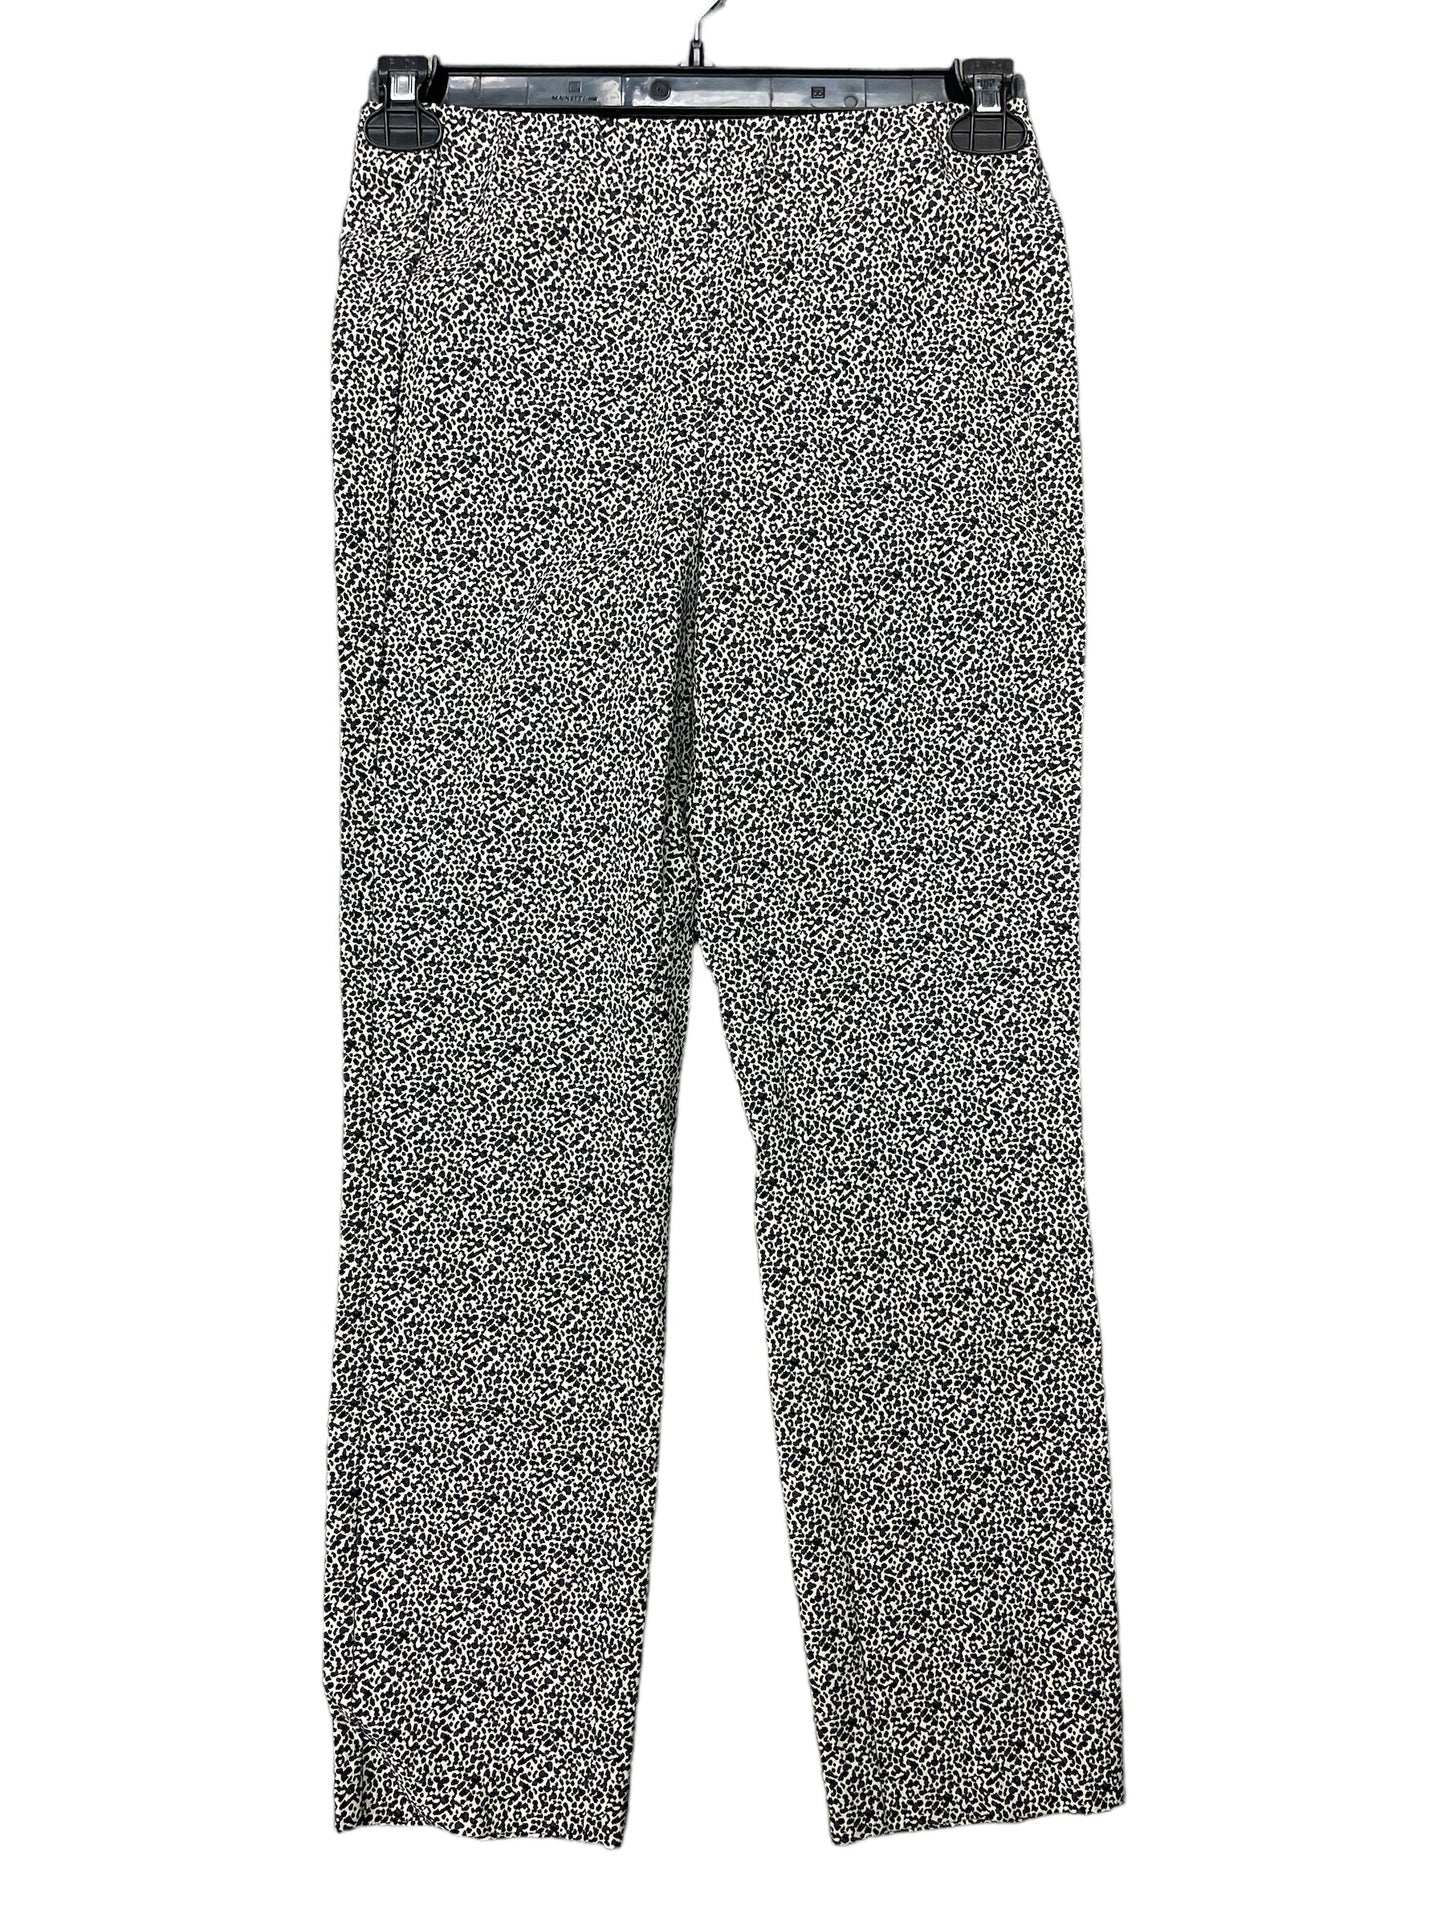 Pants Designer By Rag And Bone  Size: 8